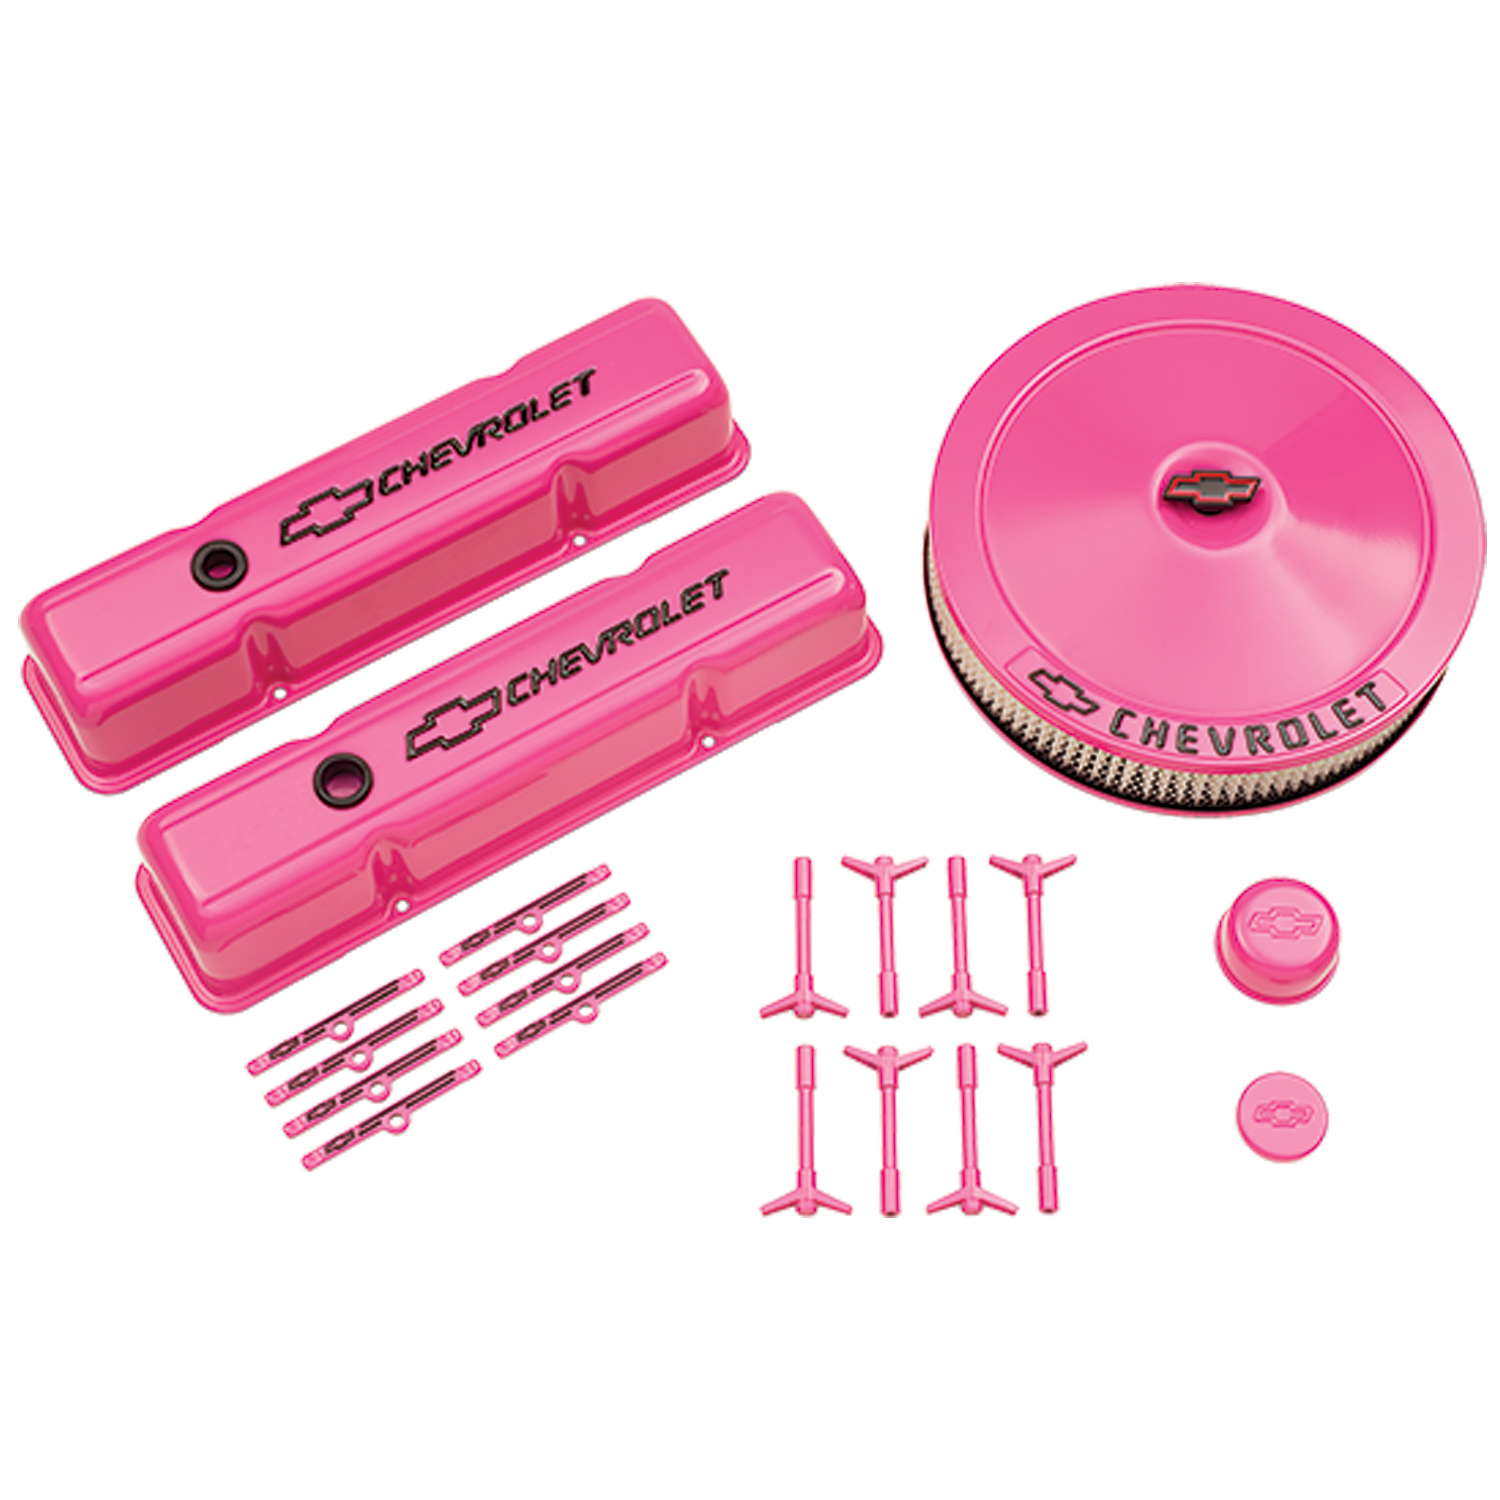 Chevy Small Block Engine Dress-up Kit Pink with Black Bowtie Emblems Proform